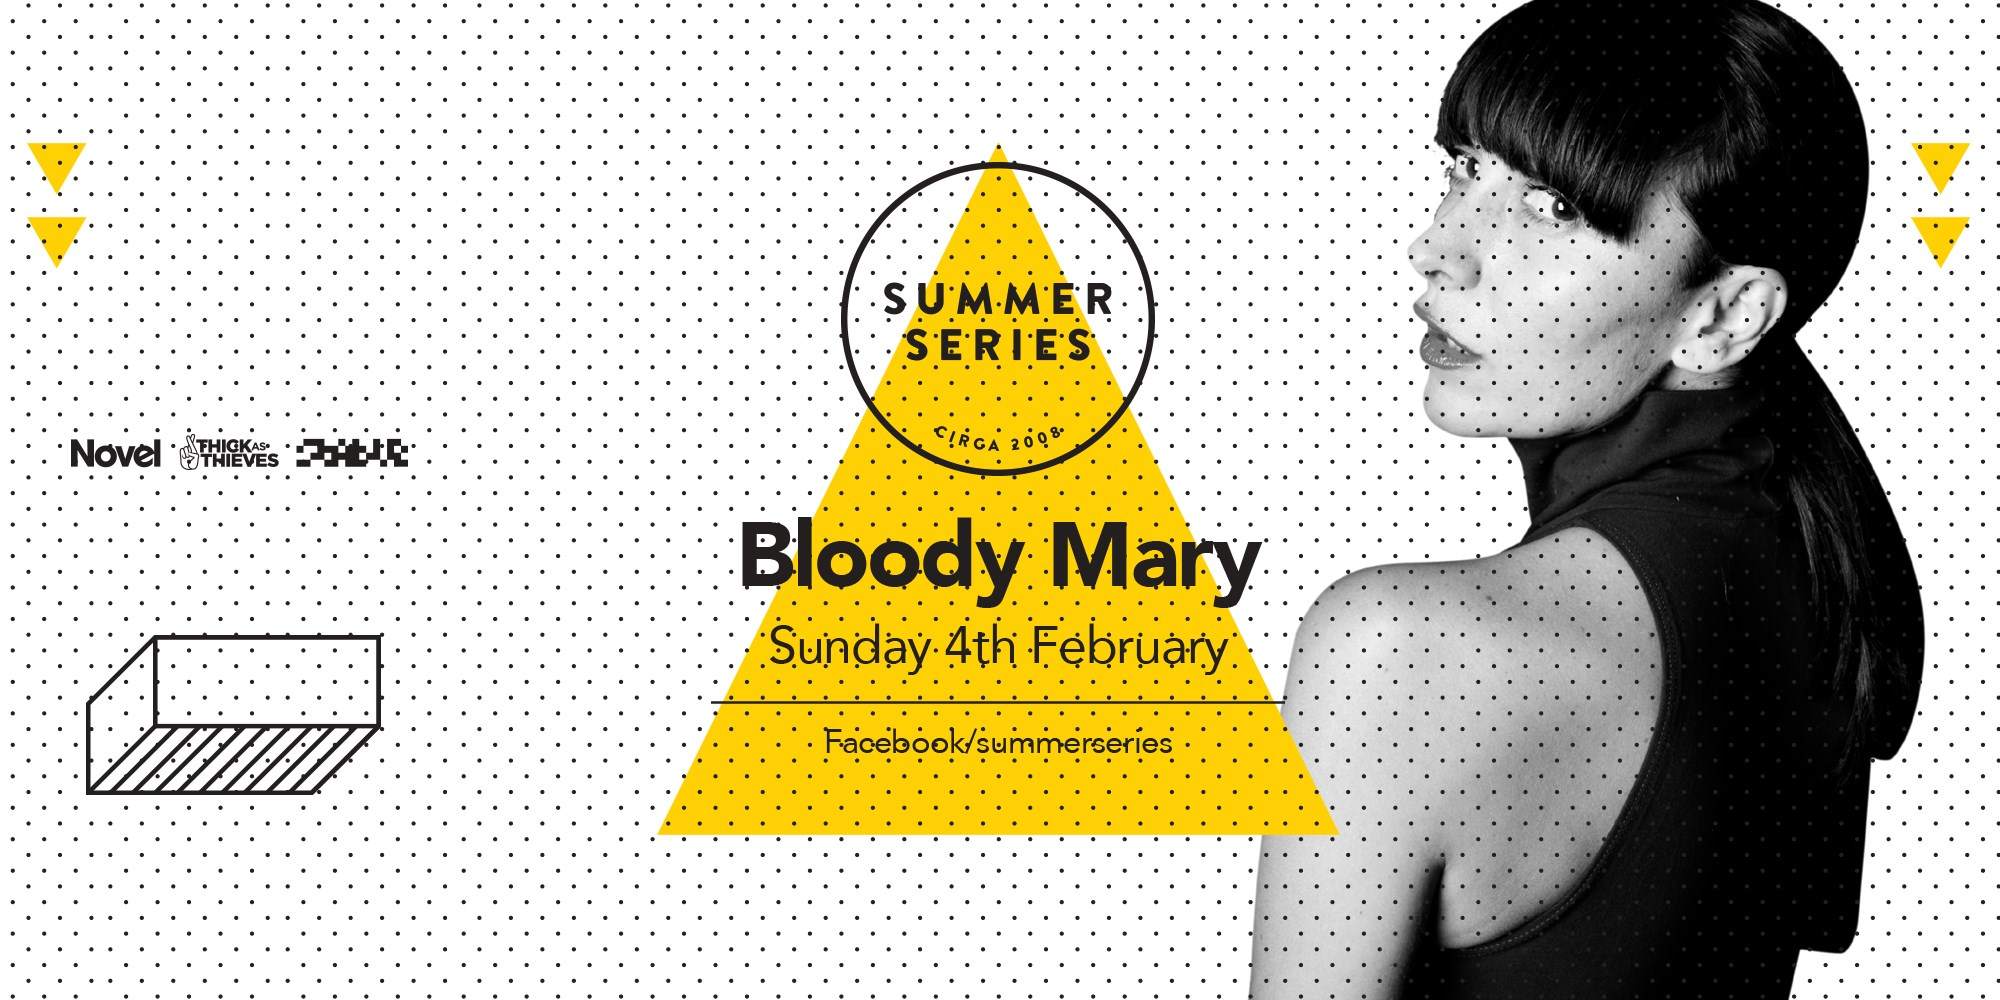 Summer Series with Bloody Mary - フライヤー表